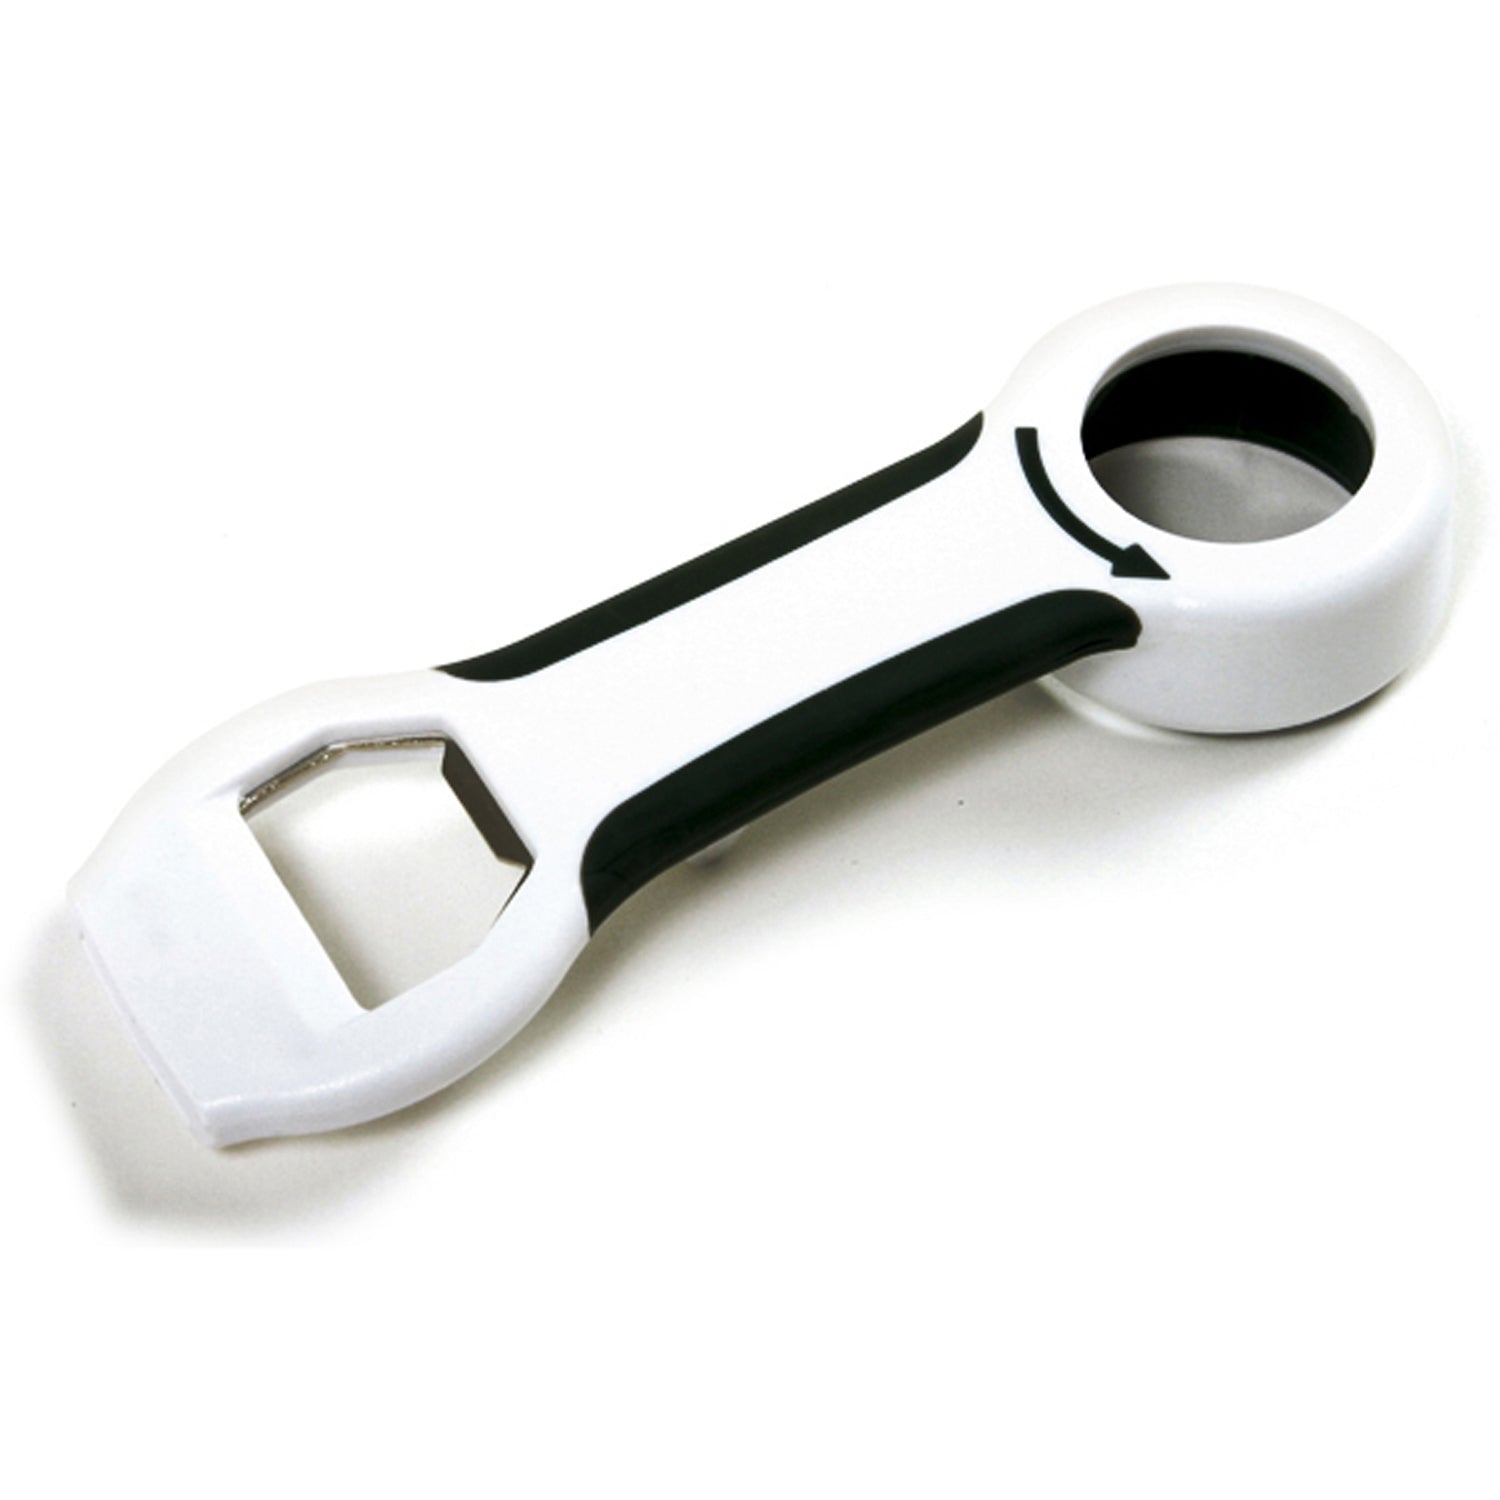 Norpro Grip-Ez Jar Opener - Opens 1 to 4 Lids or Caps with a